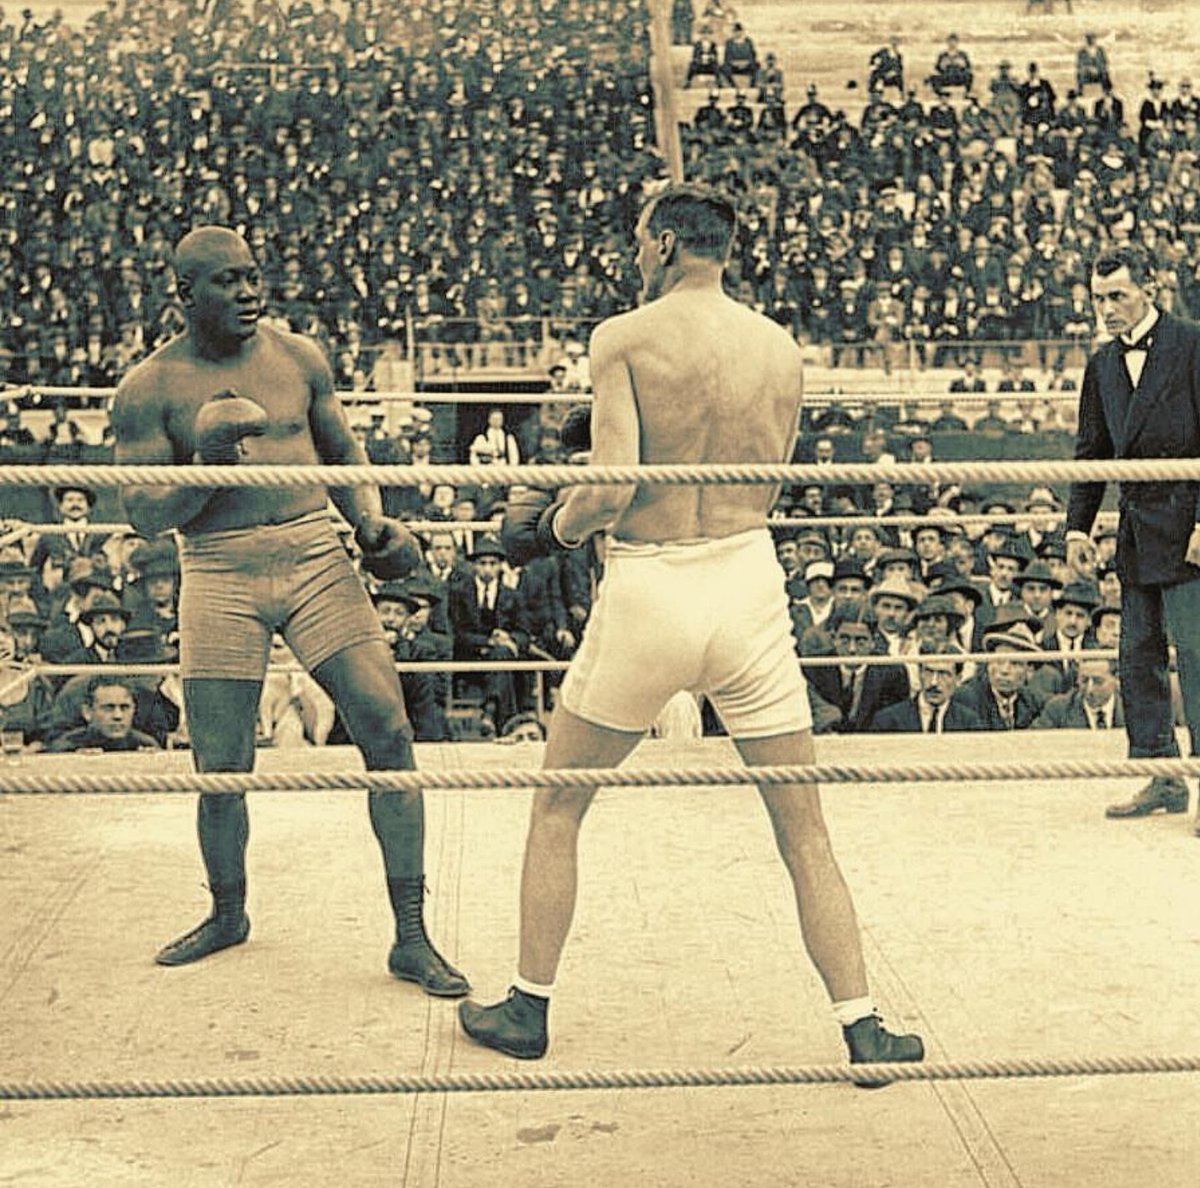 A photo of heavyweight Jack Johnson baiting in Arthur Craven in 1916. #GalvestonGiant #BoxingHistory